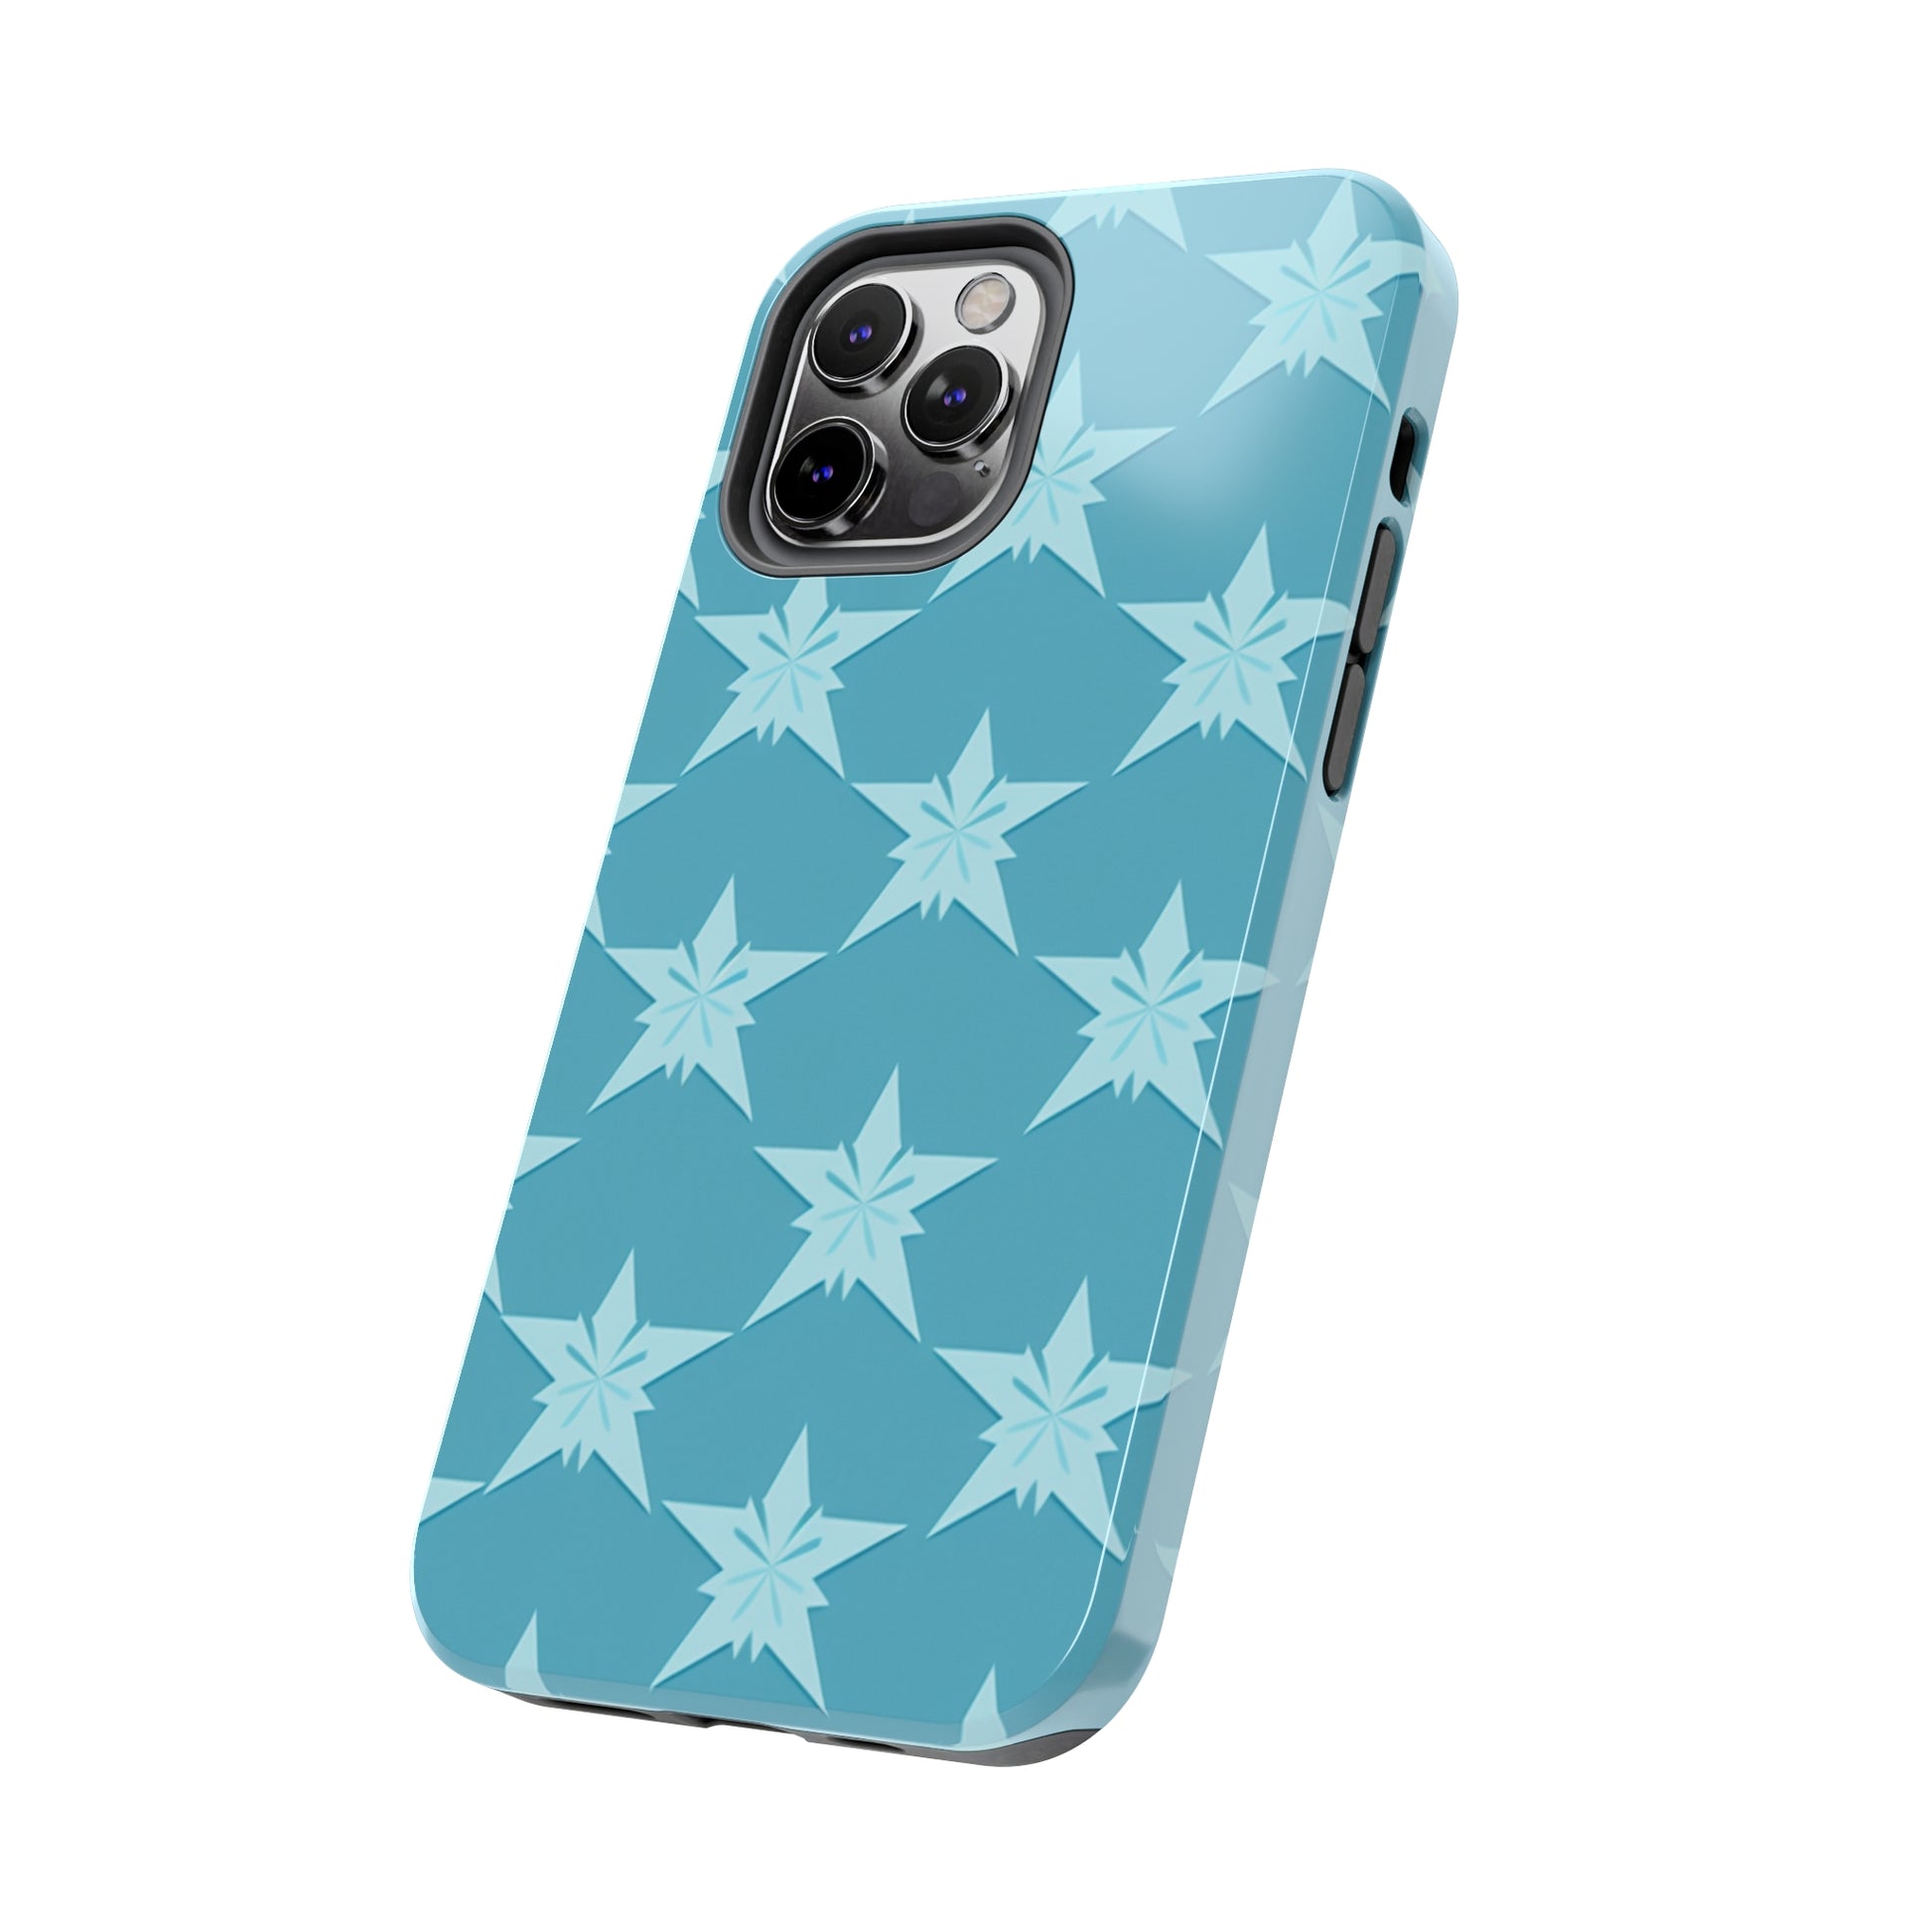 Cosmic-Inspired Phone Cover